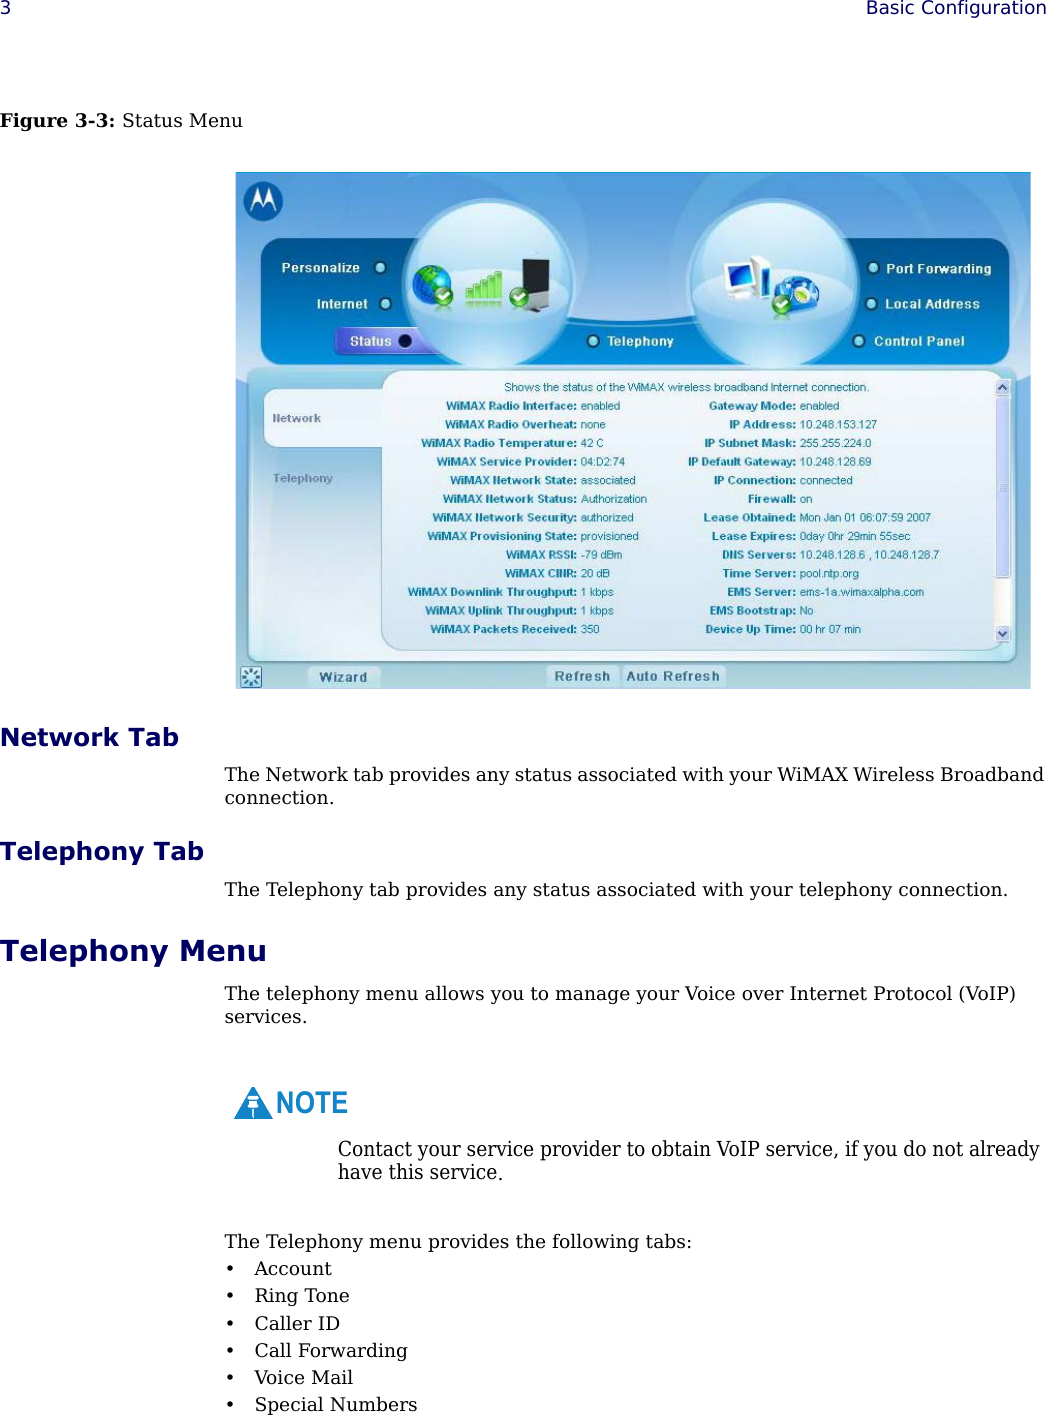 3Basic Configuration Figure 3-3: Status MenuNetwork TabThe Network tab provides any status associated with your WiMAX Wireless Broadband connection.Telephony TabThe Telephony tab provides any status associated with your telephony connection.Telephony MenuThe telephony menu allows you to manage your Voice over Internet Protocol (VoIP) services. The Telephony menu provides the following tabs:• Account•Ring Tone• Caller ID• Call Forwarding•Voice Mail• Special NumbersContact your service provider to obtain VoIP service, if you do not already have this service.NOTE